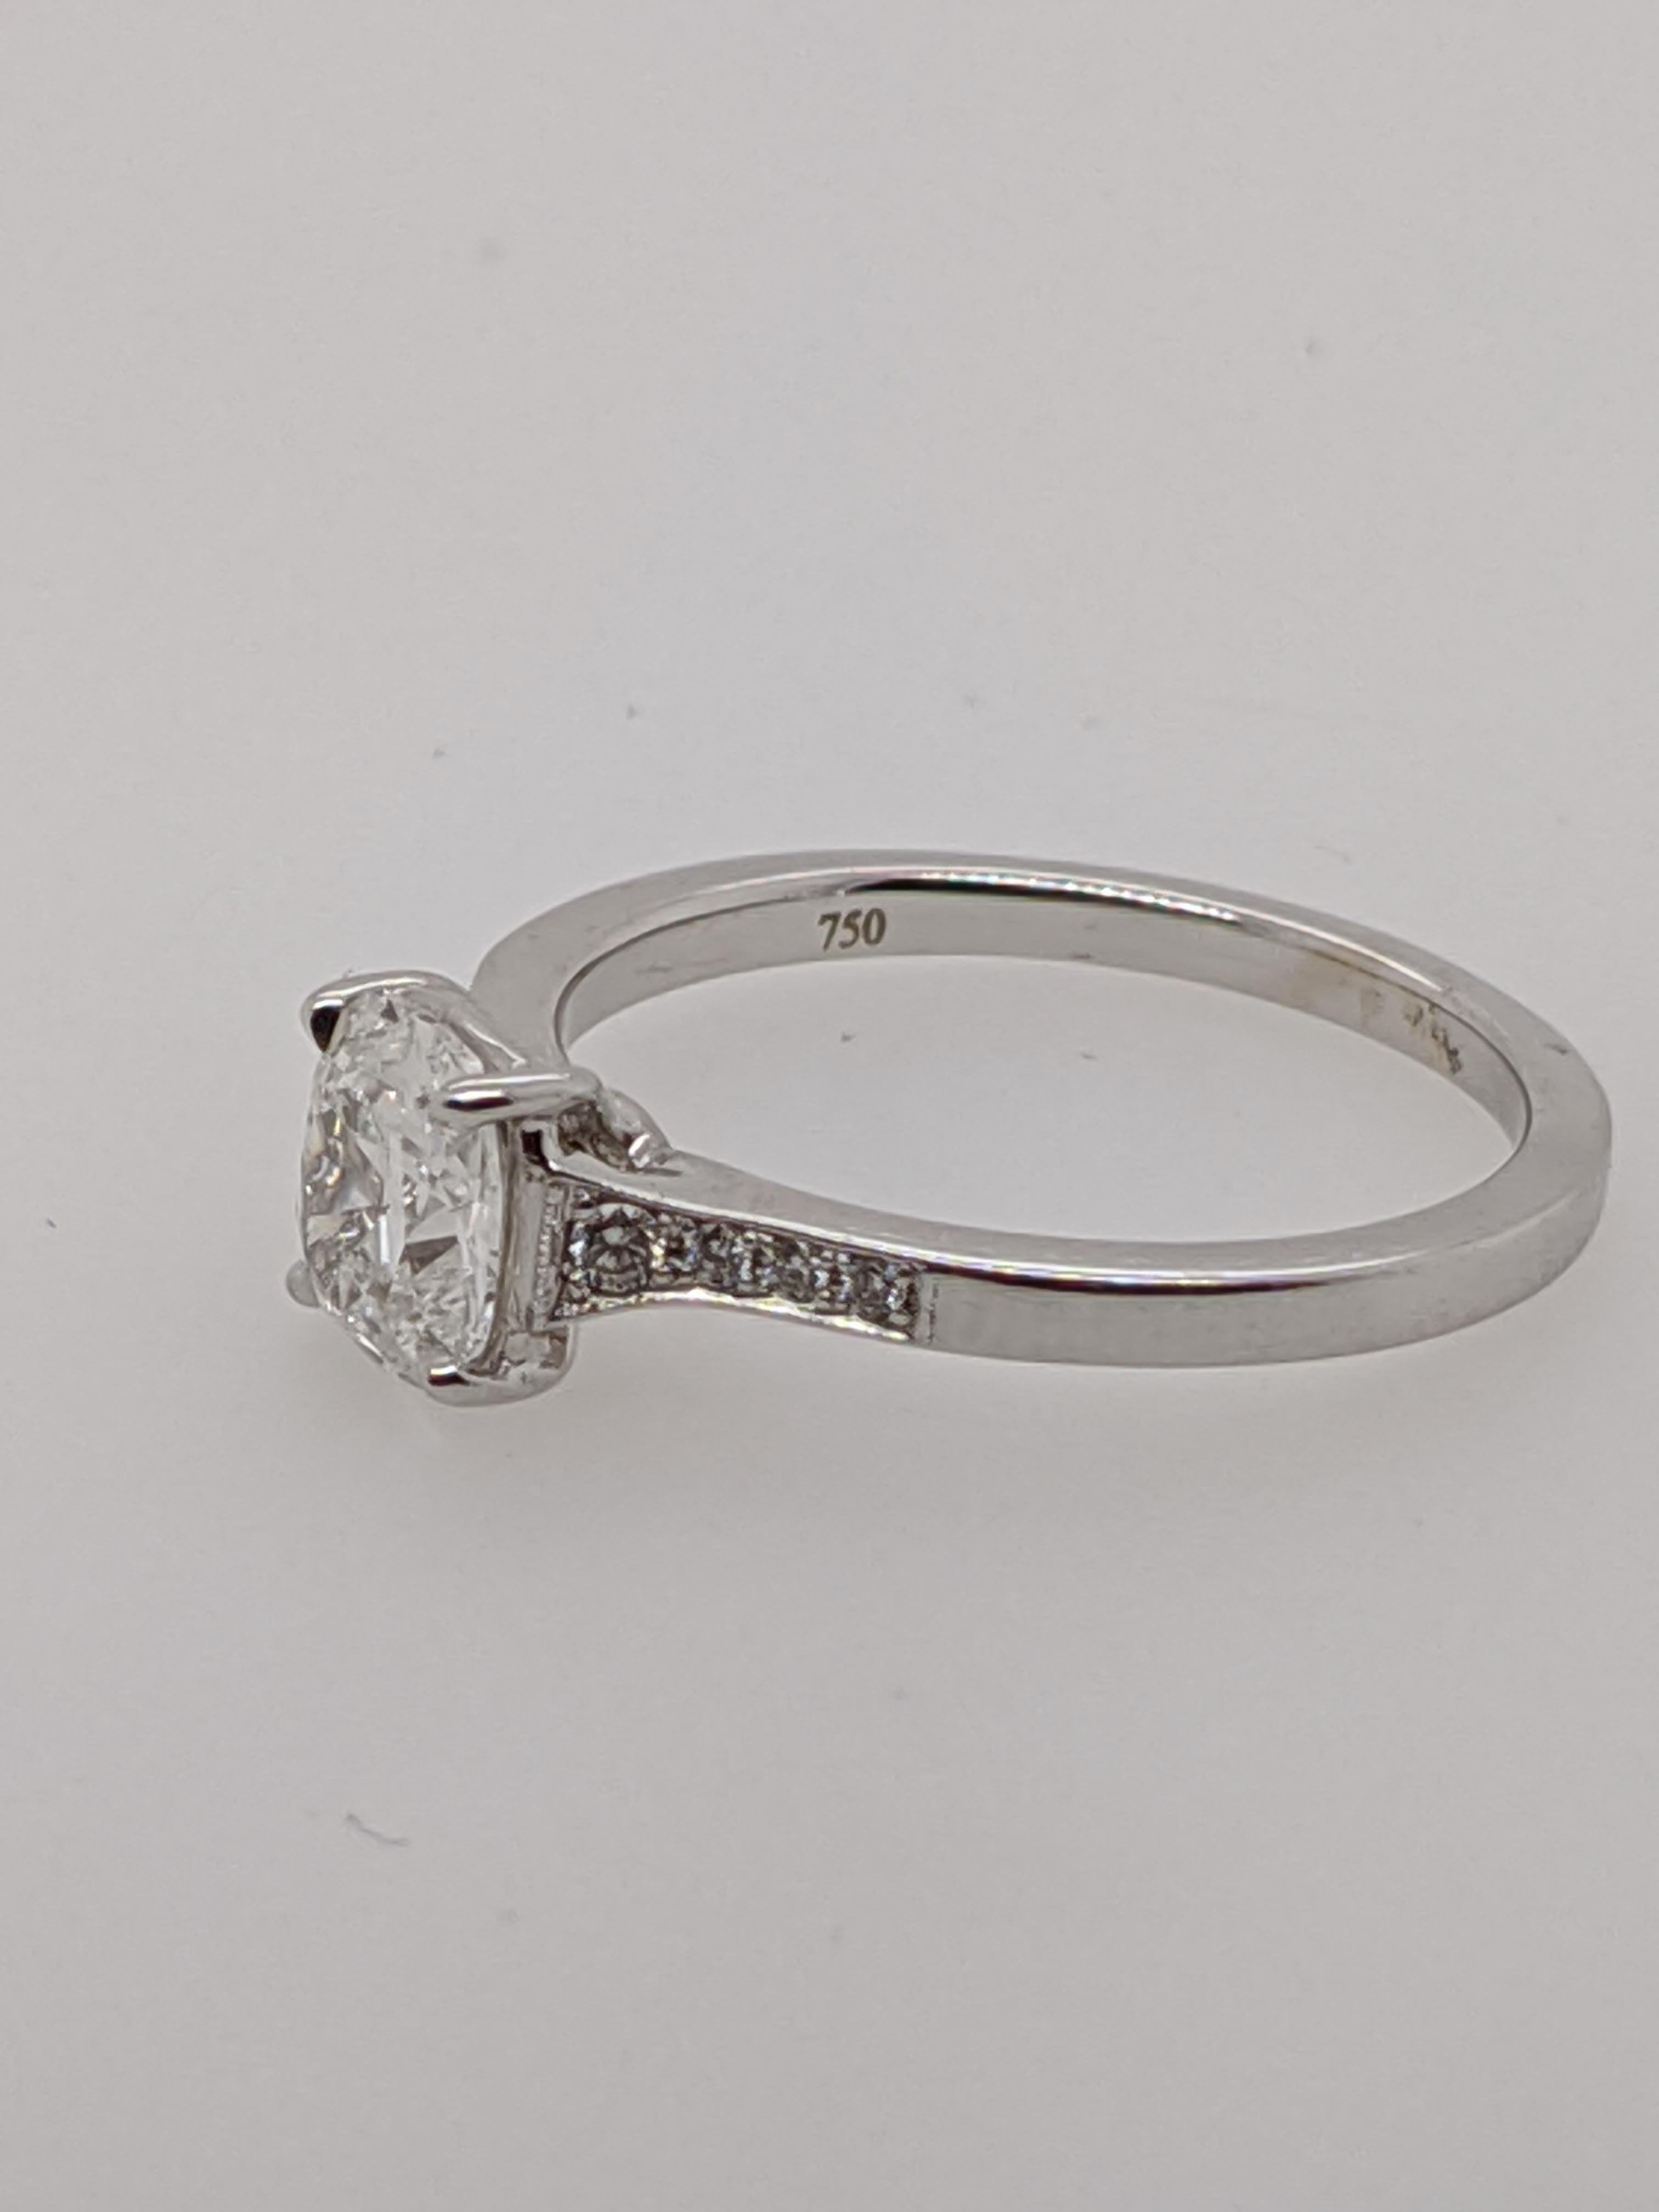 Classic 18 karat white gold vintage style ring handmade in the United States.  Featuring a 1.00 carat D color SI2 clarity antique style cushion (GIA grading report number 1172473450).  This diamond is unmounted and can be made in this romantic style